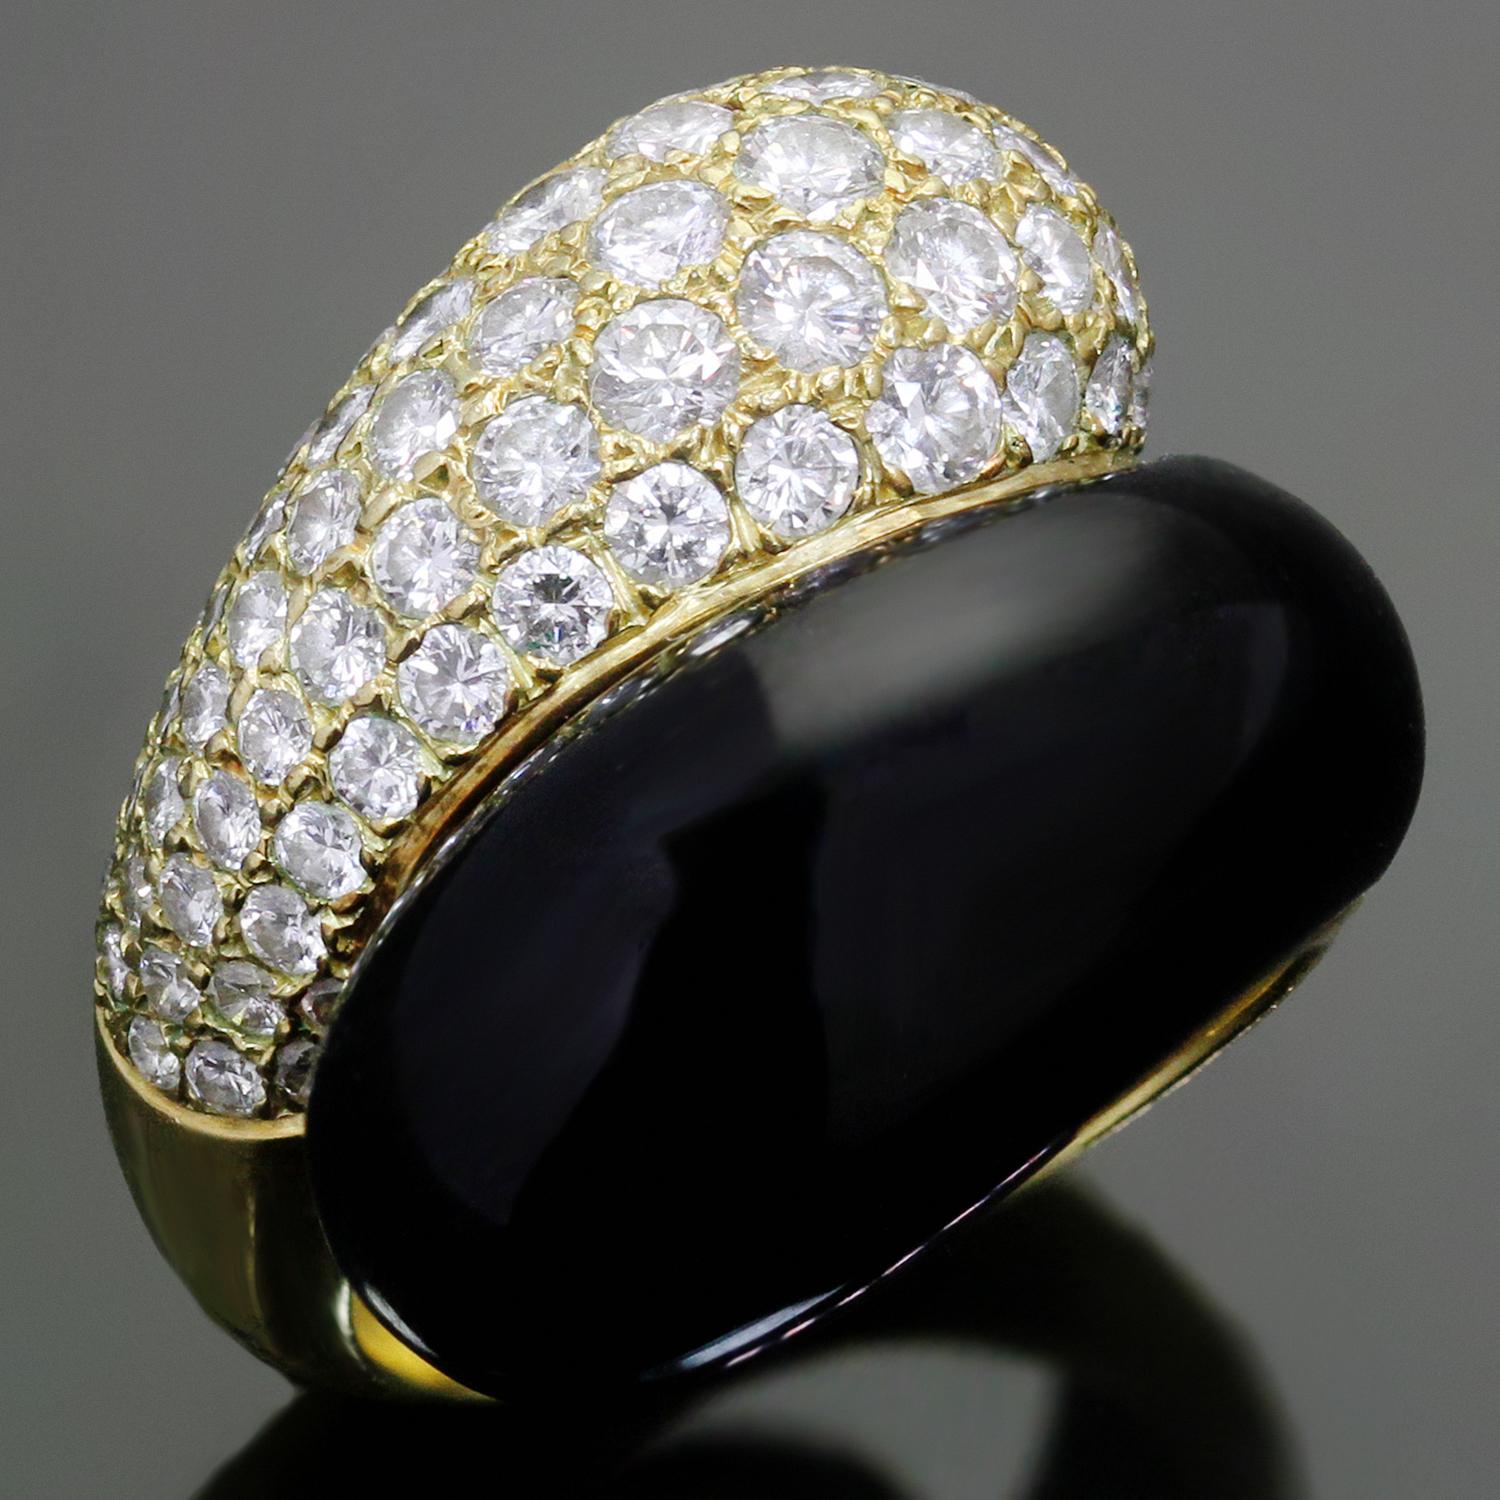 This magnificent Van Cleef & Arpels ring is crafted in 18k yellow gold and set with black onyx and about 87 brilliant-cut round D-F VVS1-VVS2 diamonds weighing an estimated 3.50 carats. Made in France circa 1980s. Measurements: 0.74